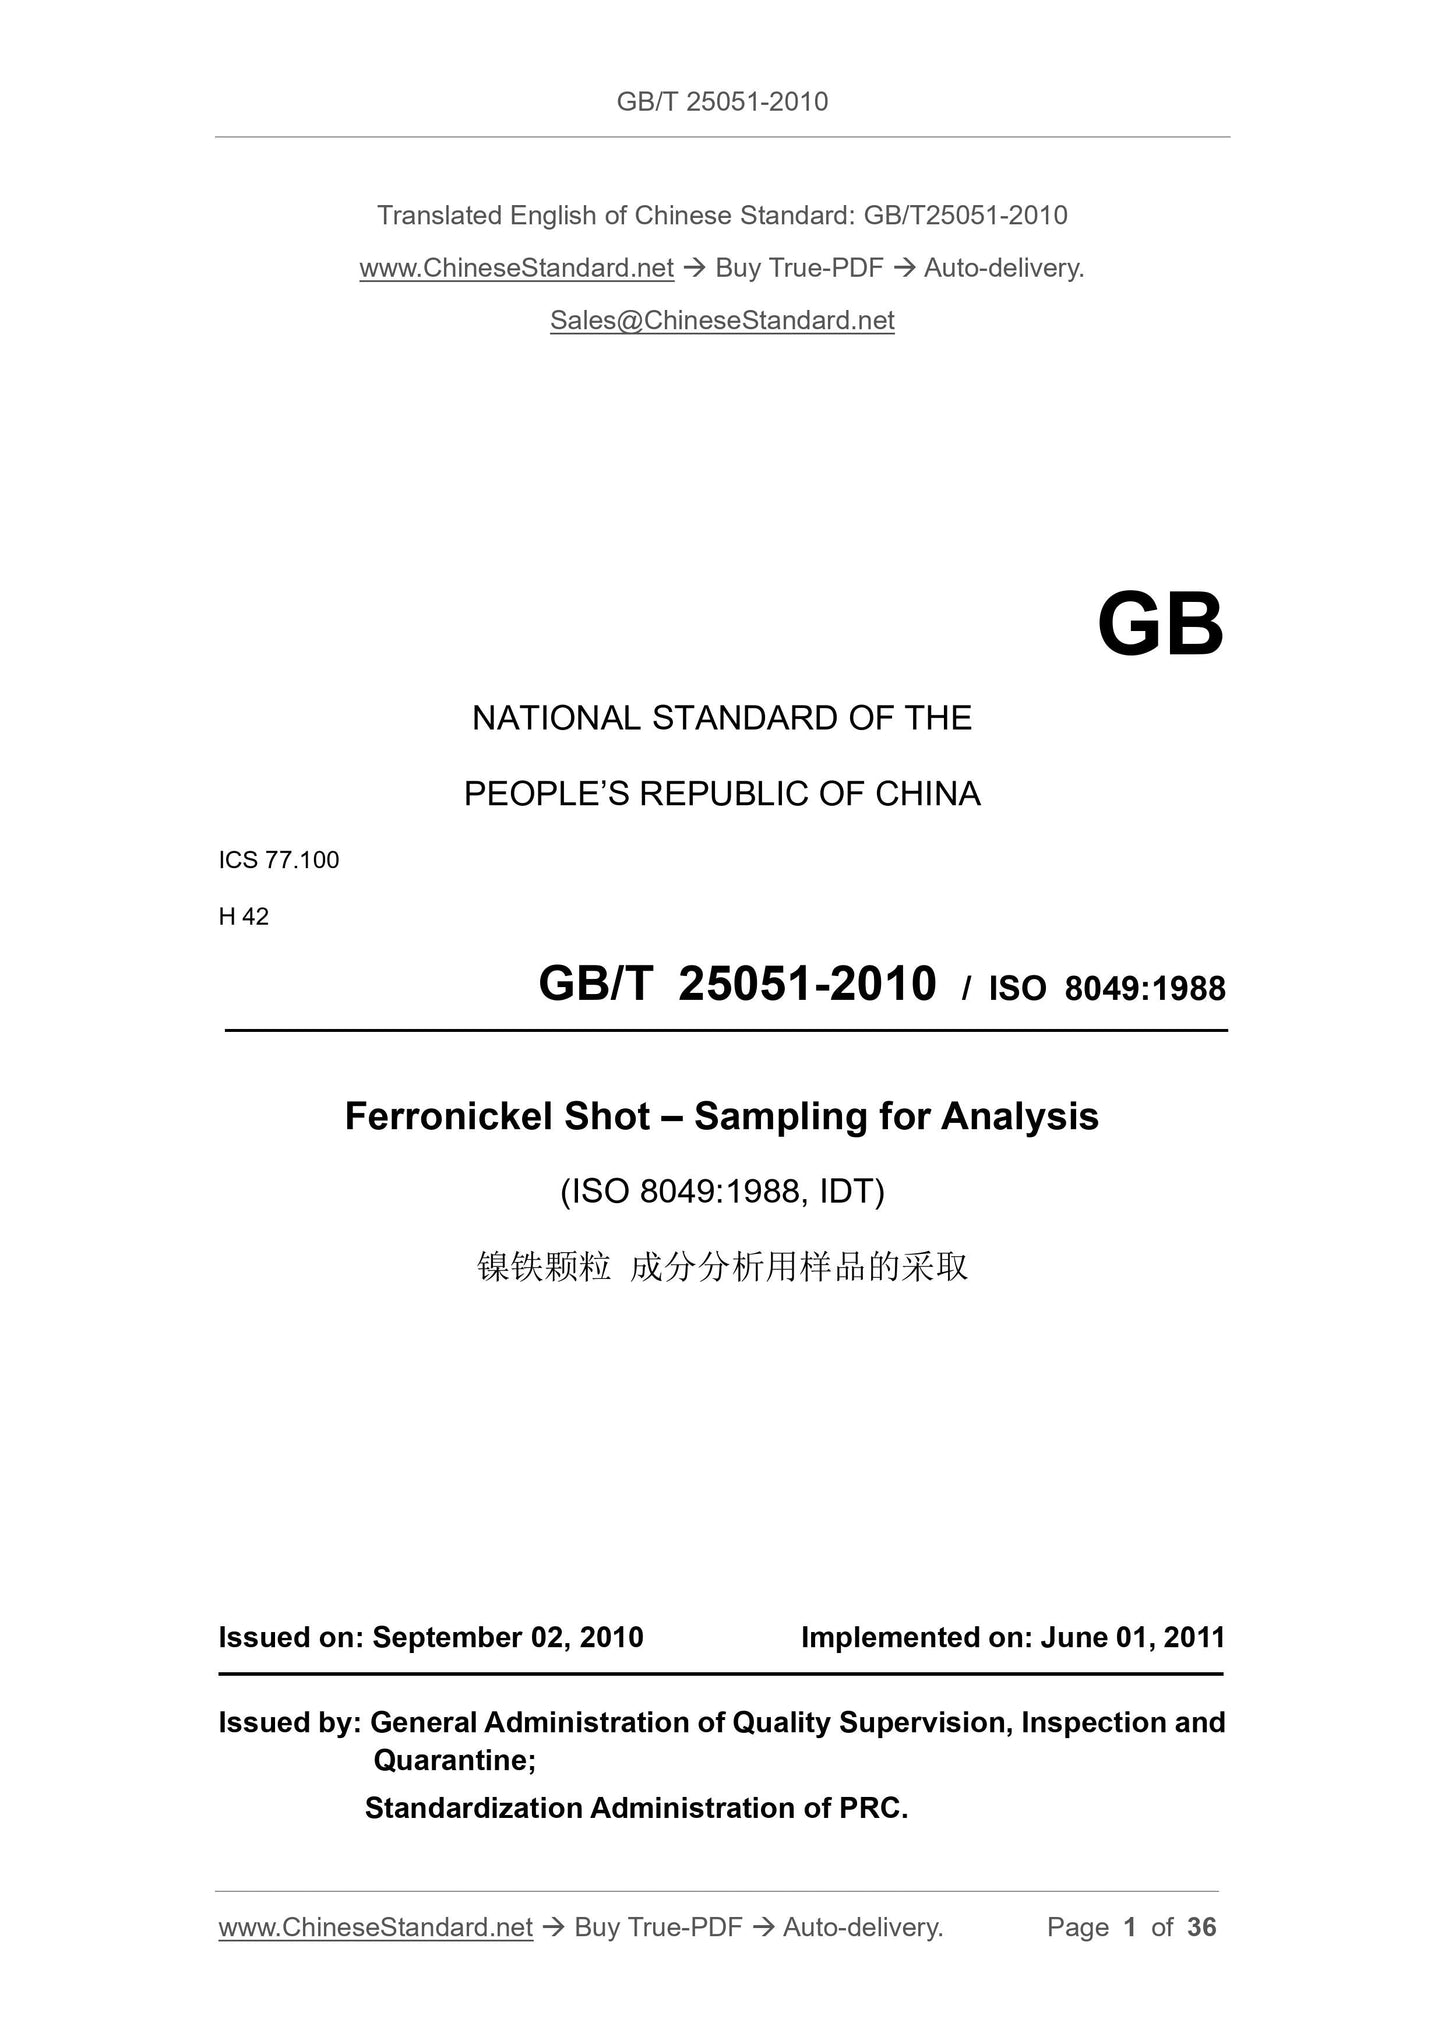 GB/T 25051-2010 Page 1